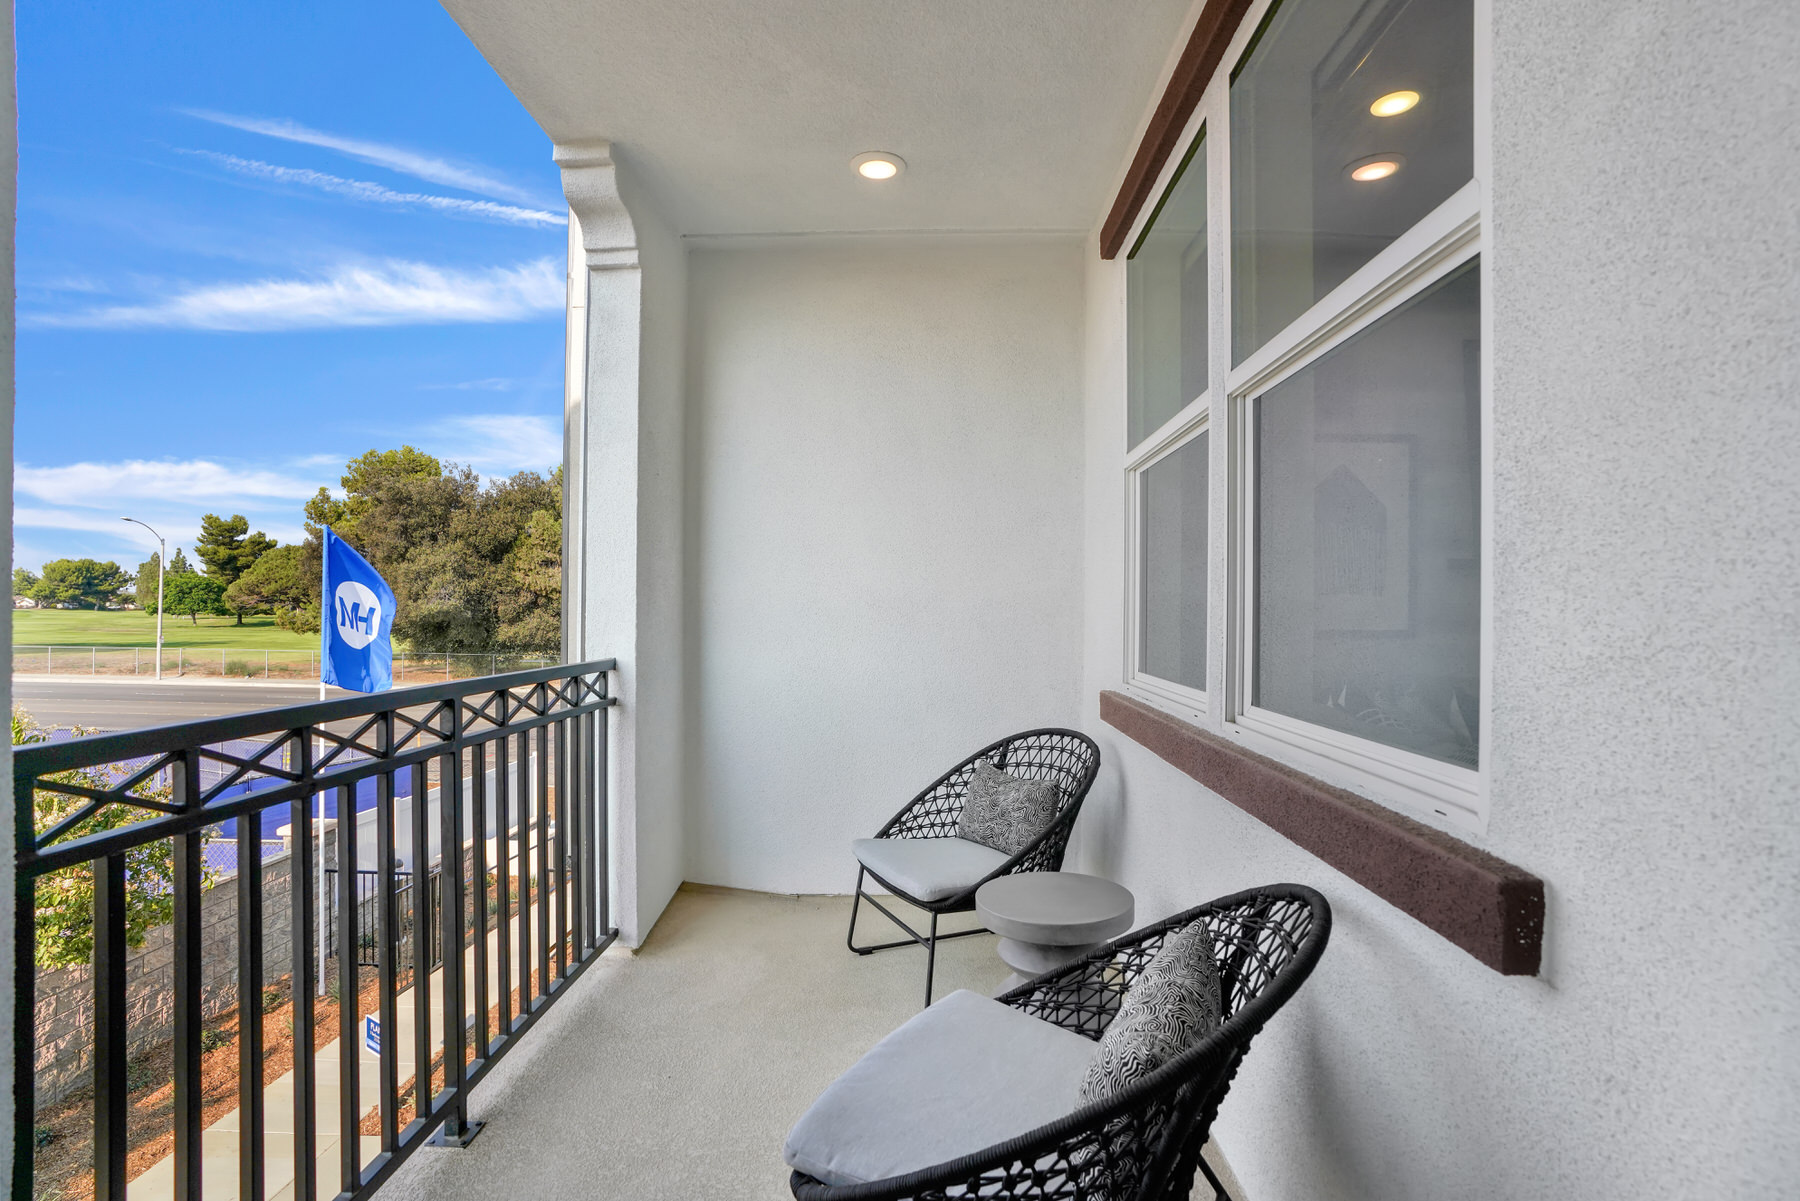 Balcony in Plan 1 at Townes at Magnolia by Melia Homes in Anaheim, CA